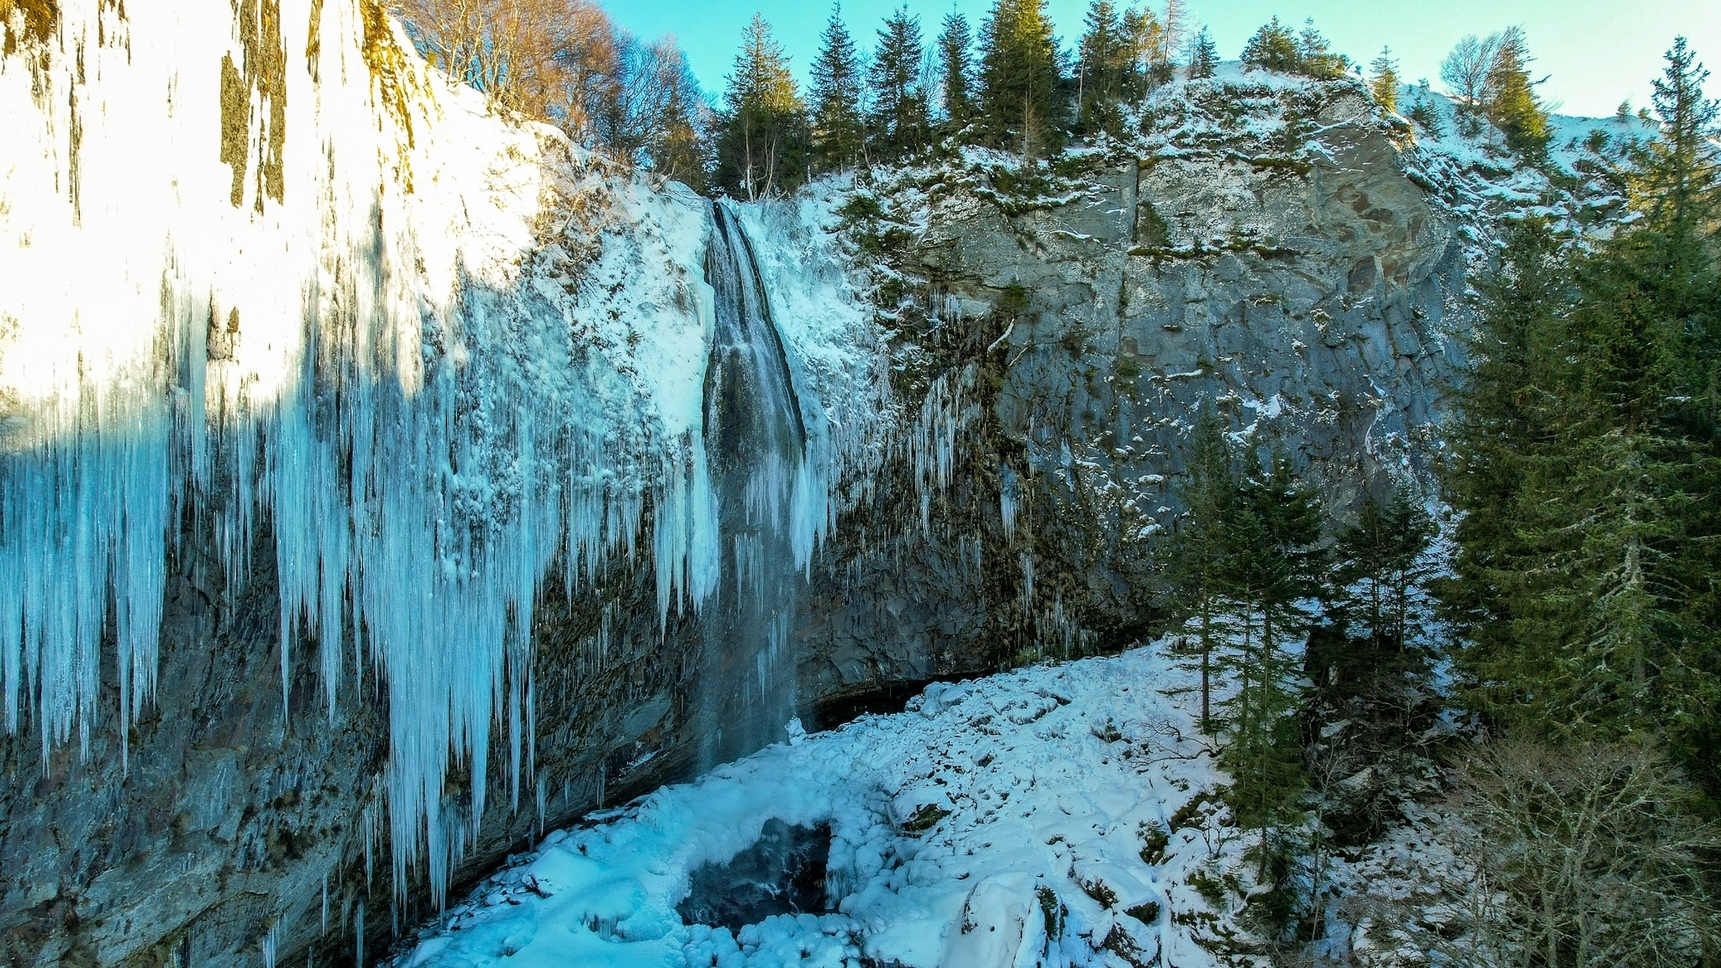 Massif du Sancy, a unique place The Great Waterfall under the Ice